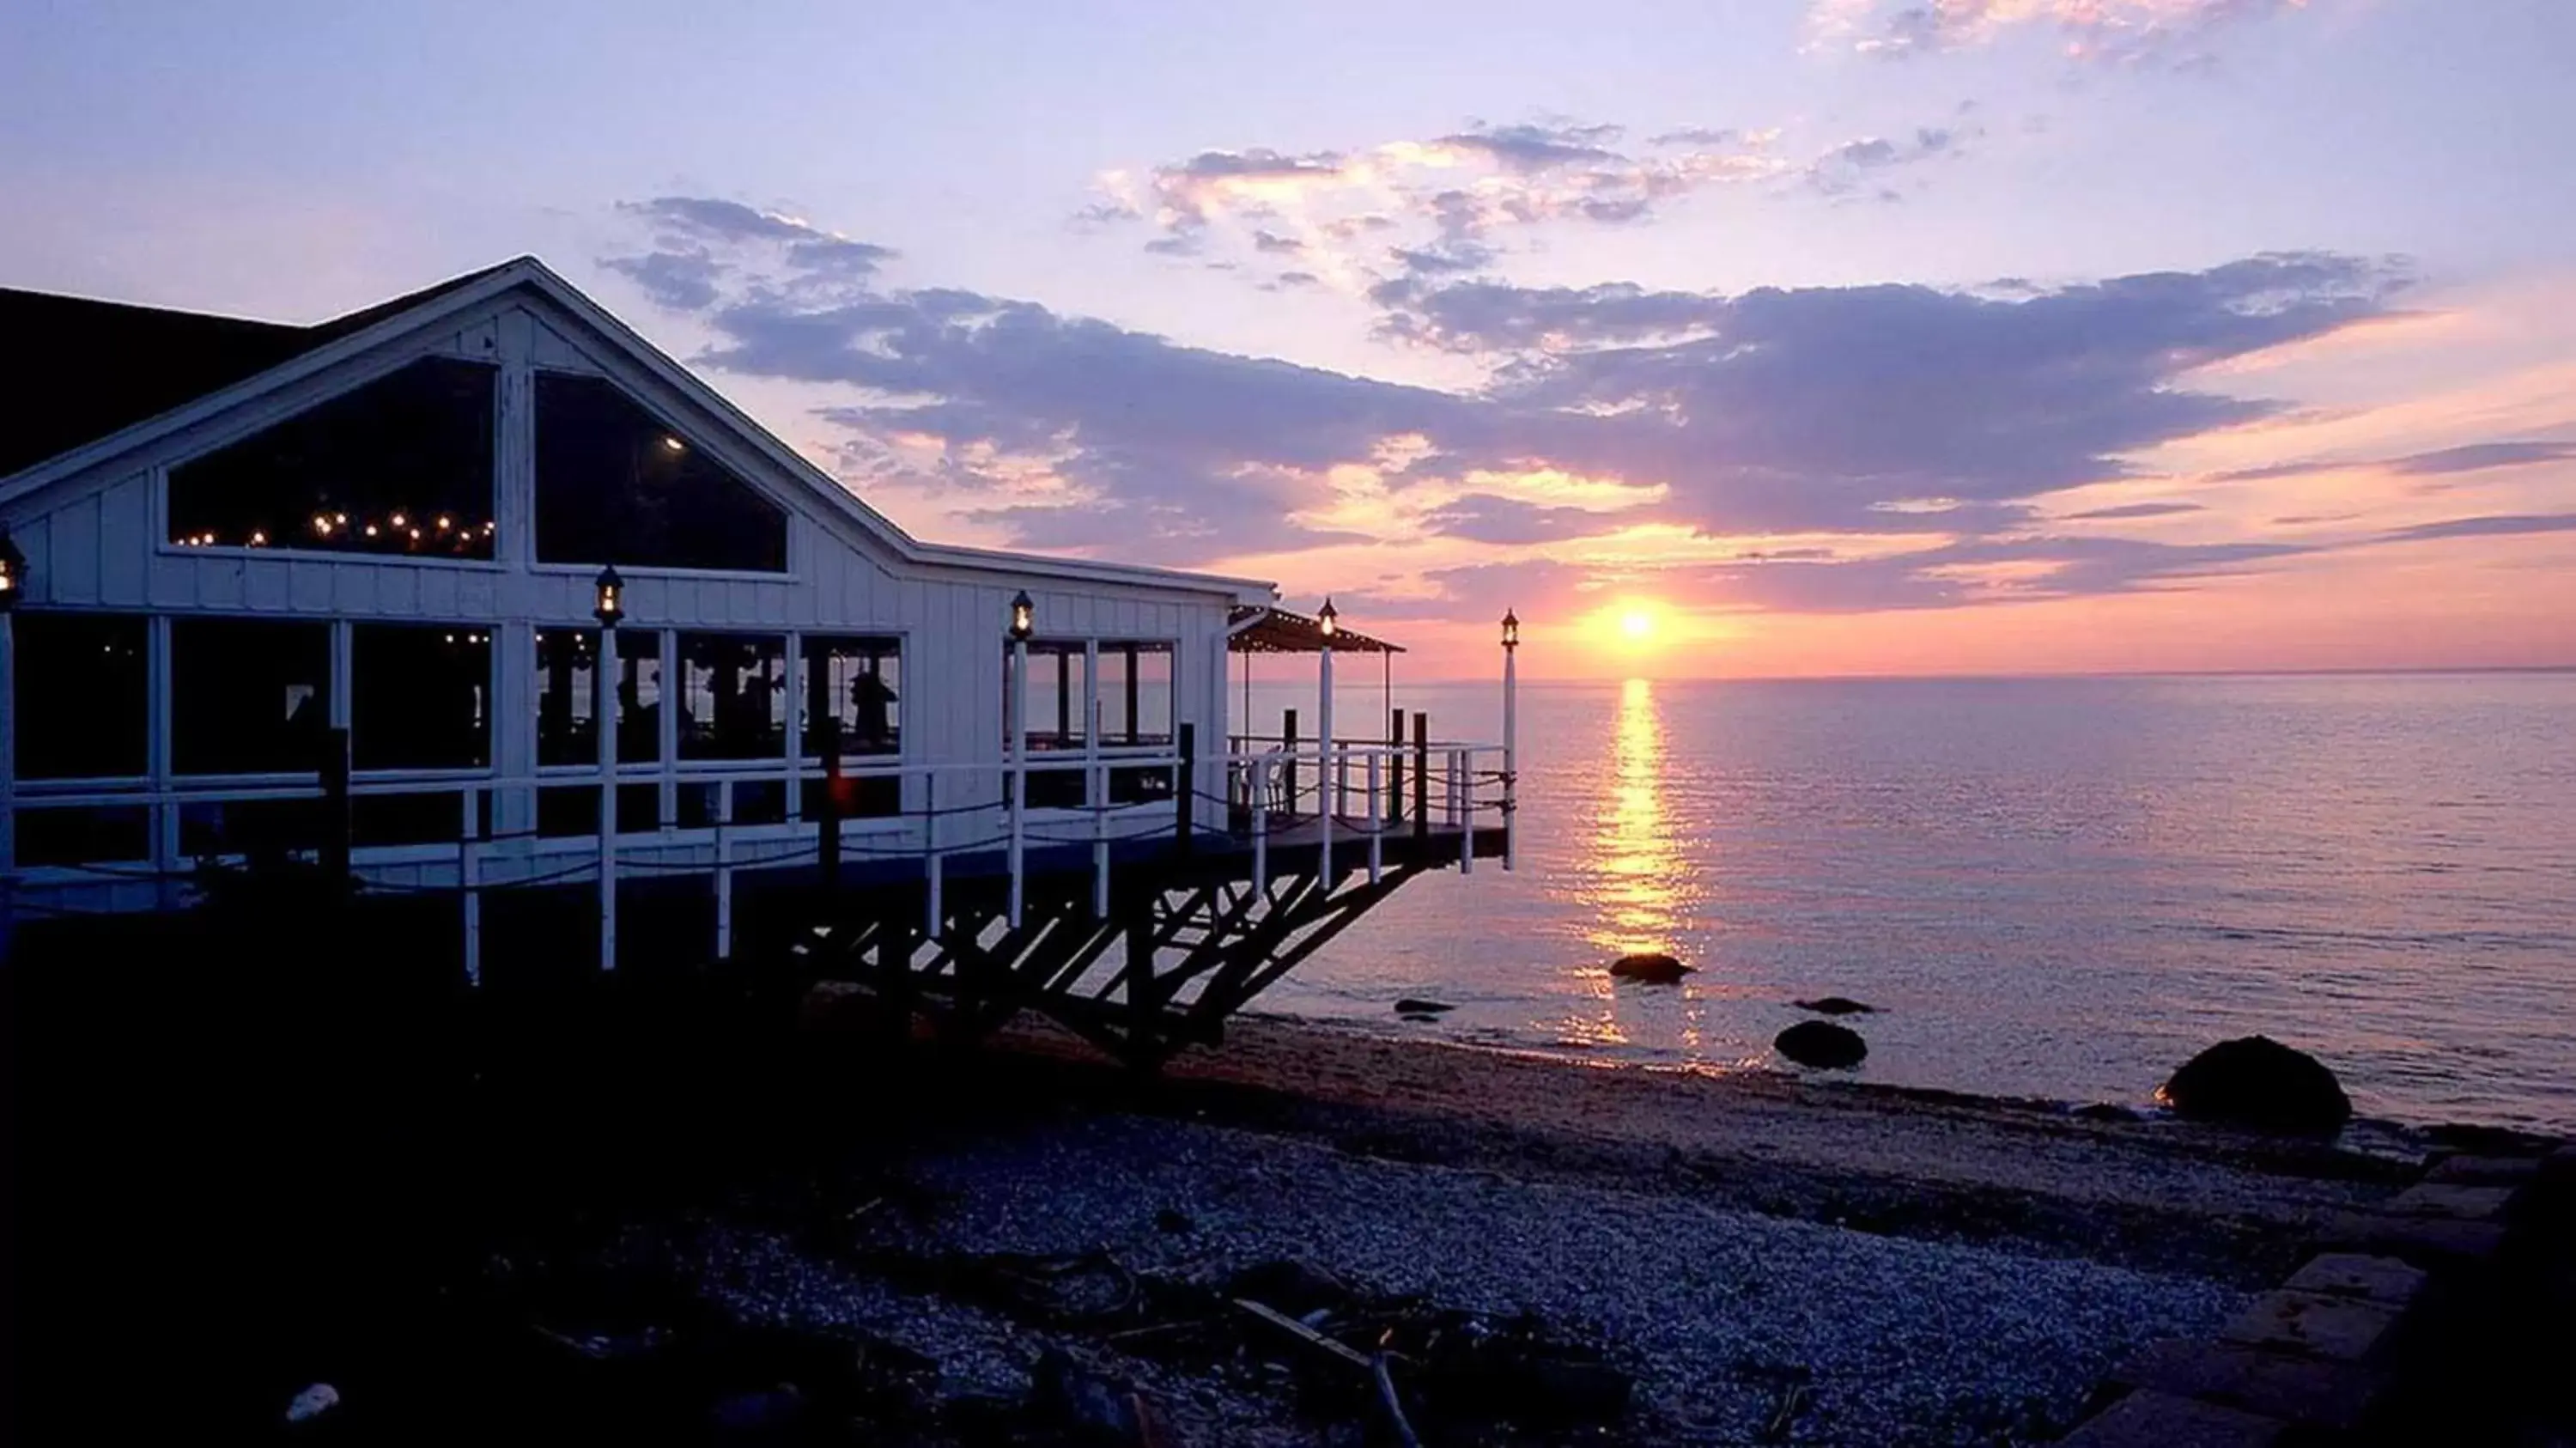 Property building, Sunrise/Sunset in Sound View Greenport